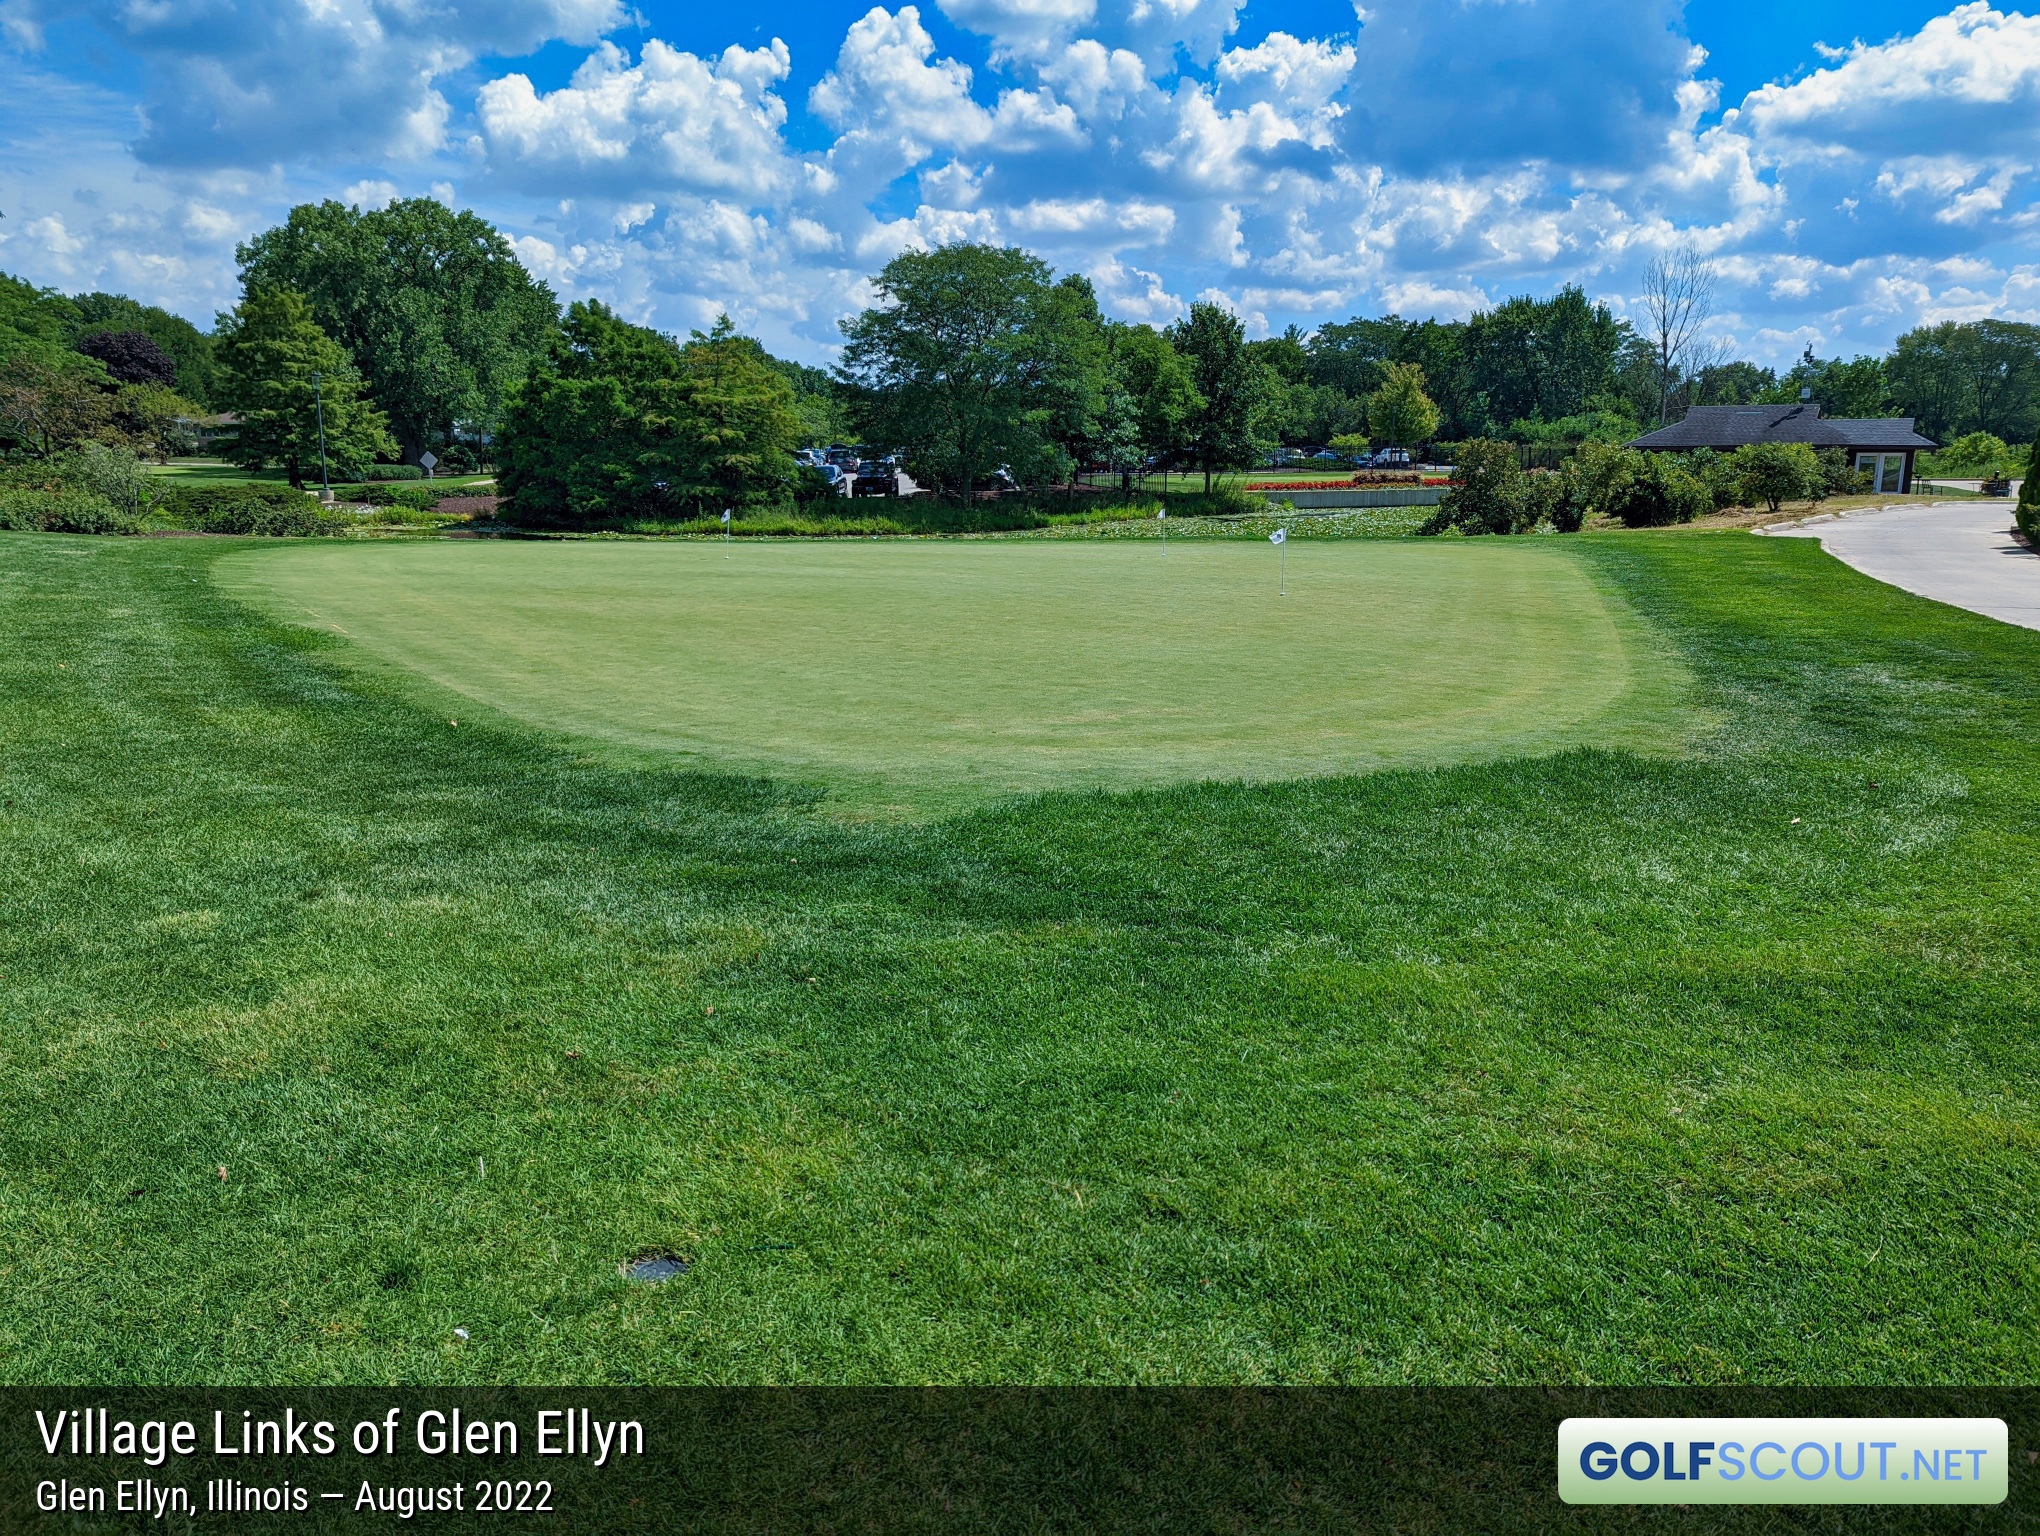 Photo of the practice area at Village Links of Glen Ellyn - 9 Hole Course in Glen Ellyn, Illinois. 